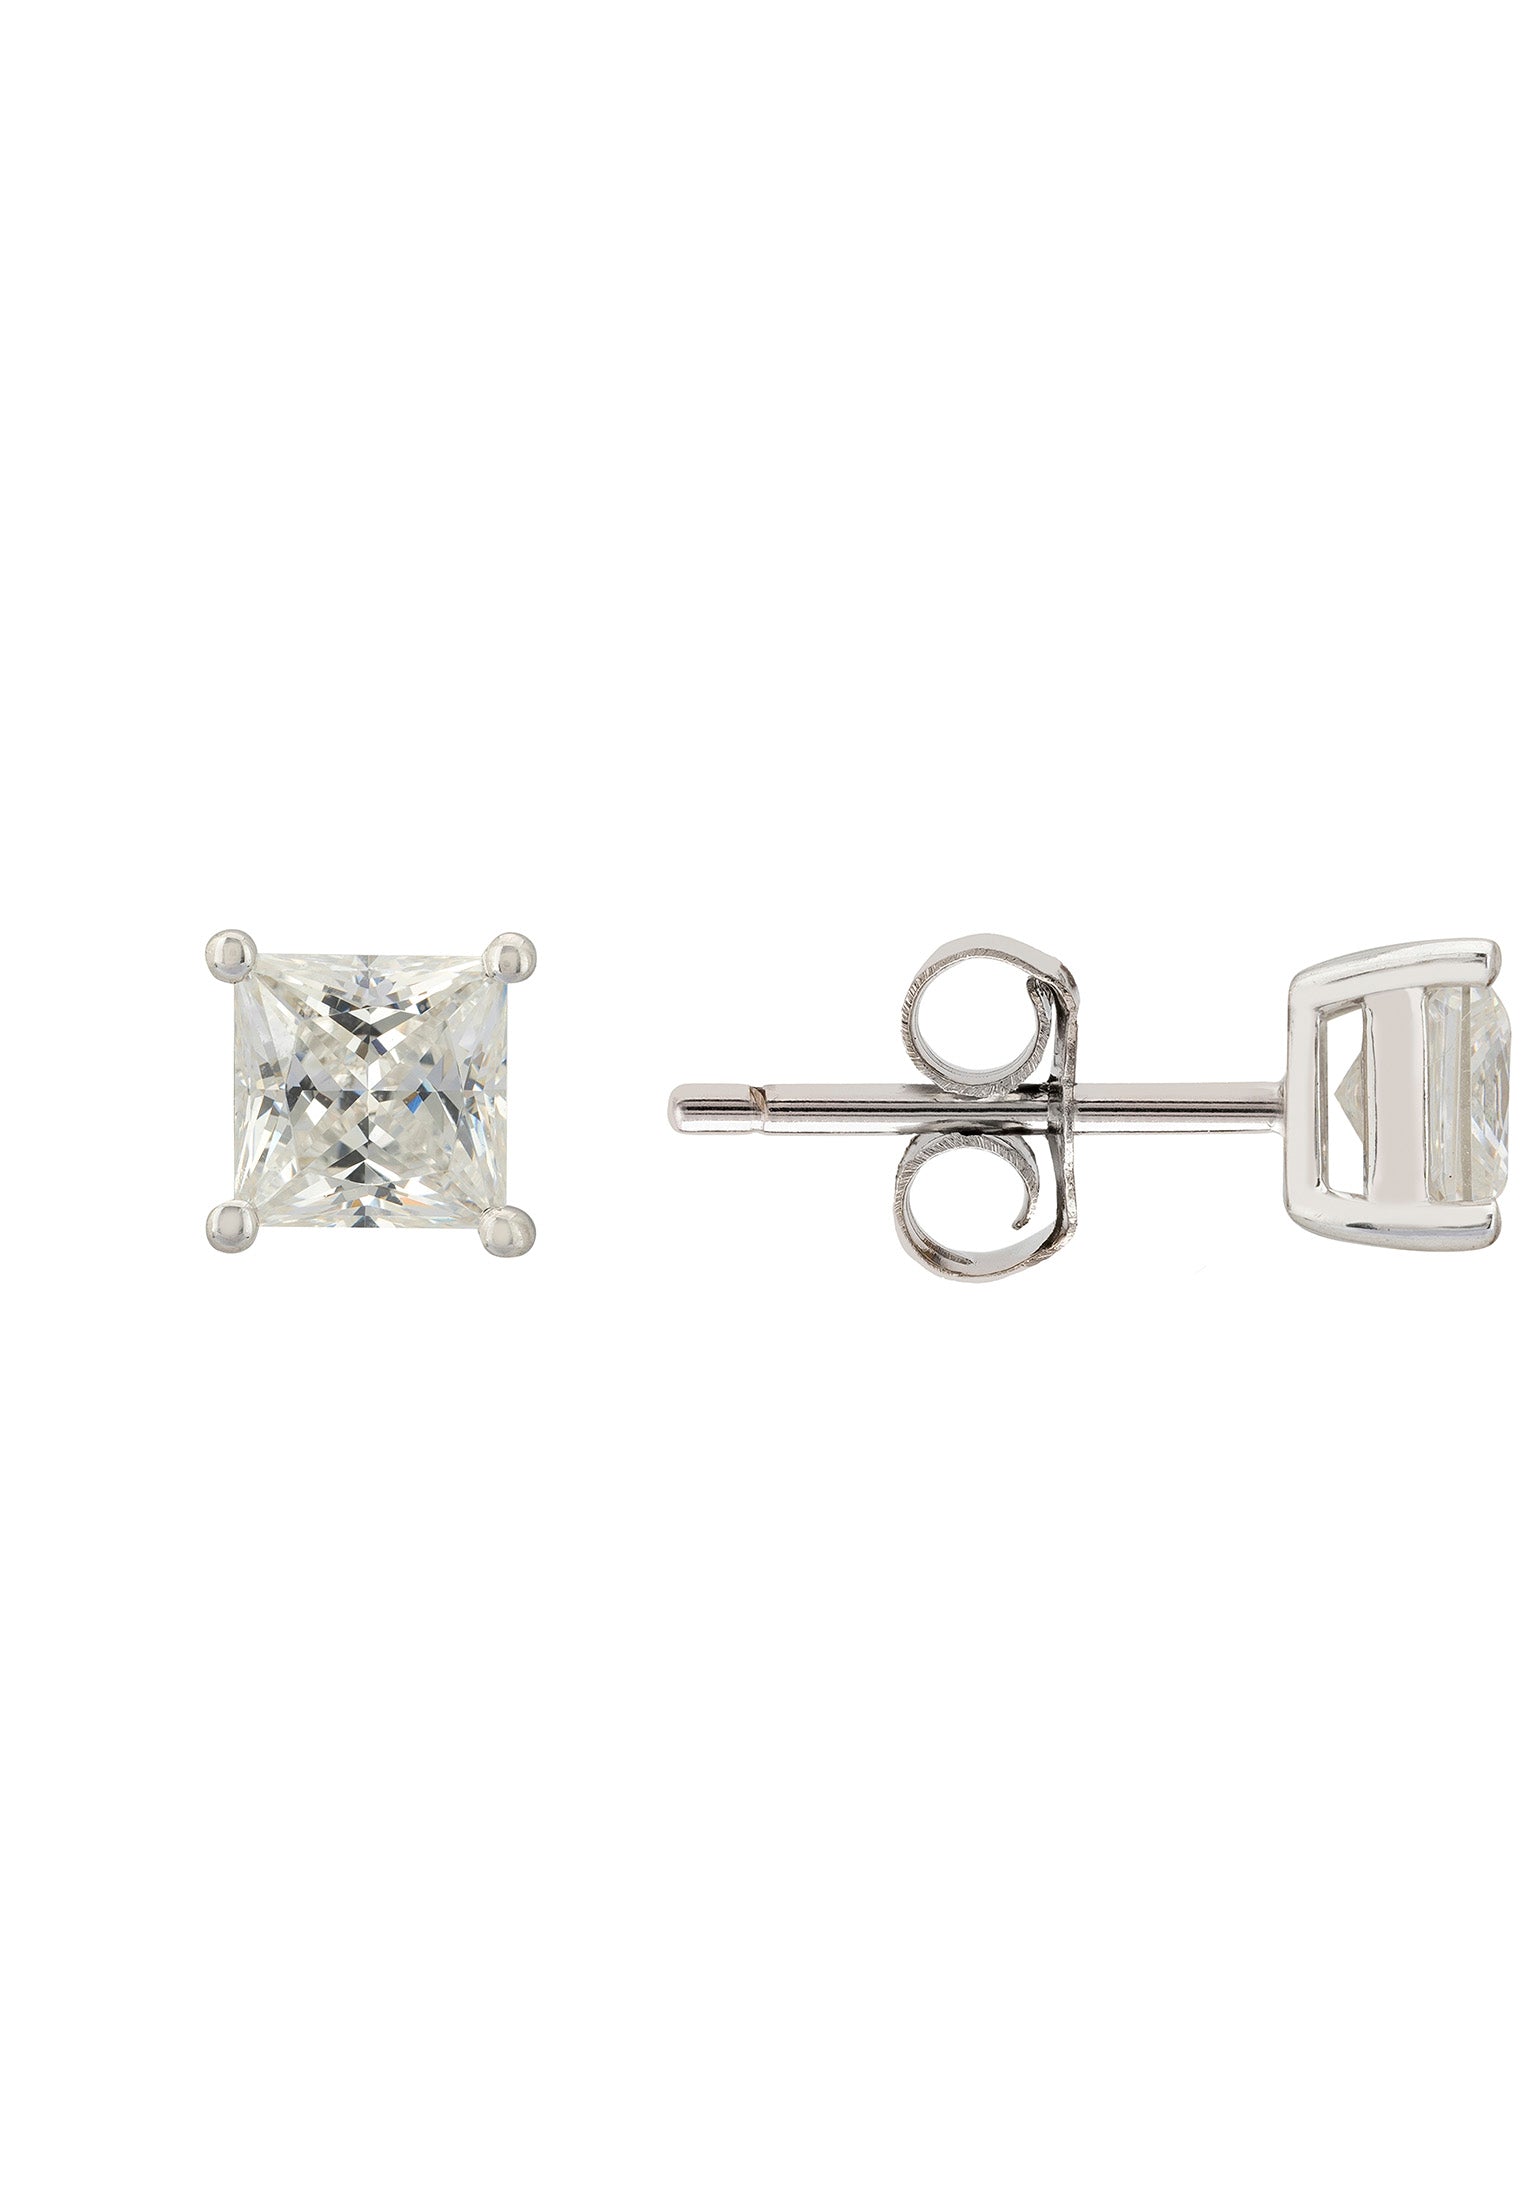 Mens Single Square Solitaire Stud Earring Moissanite Silver